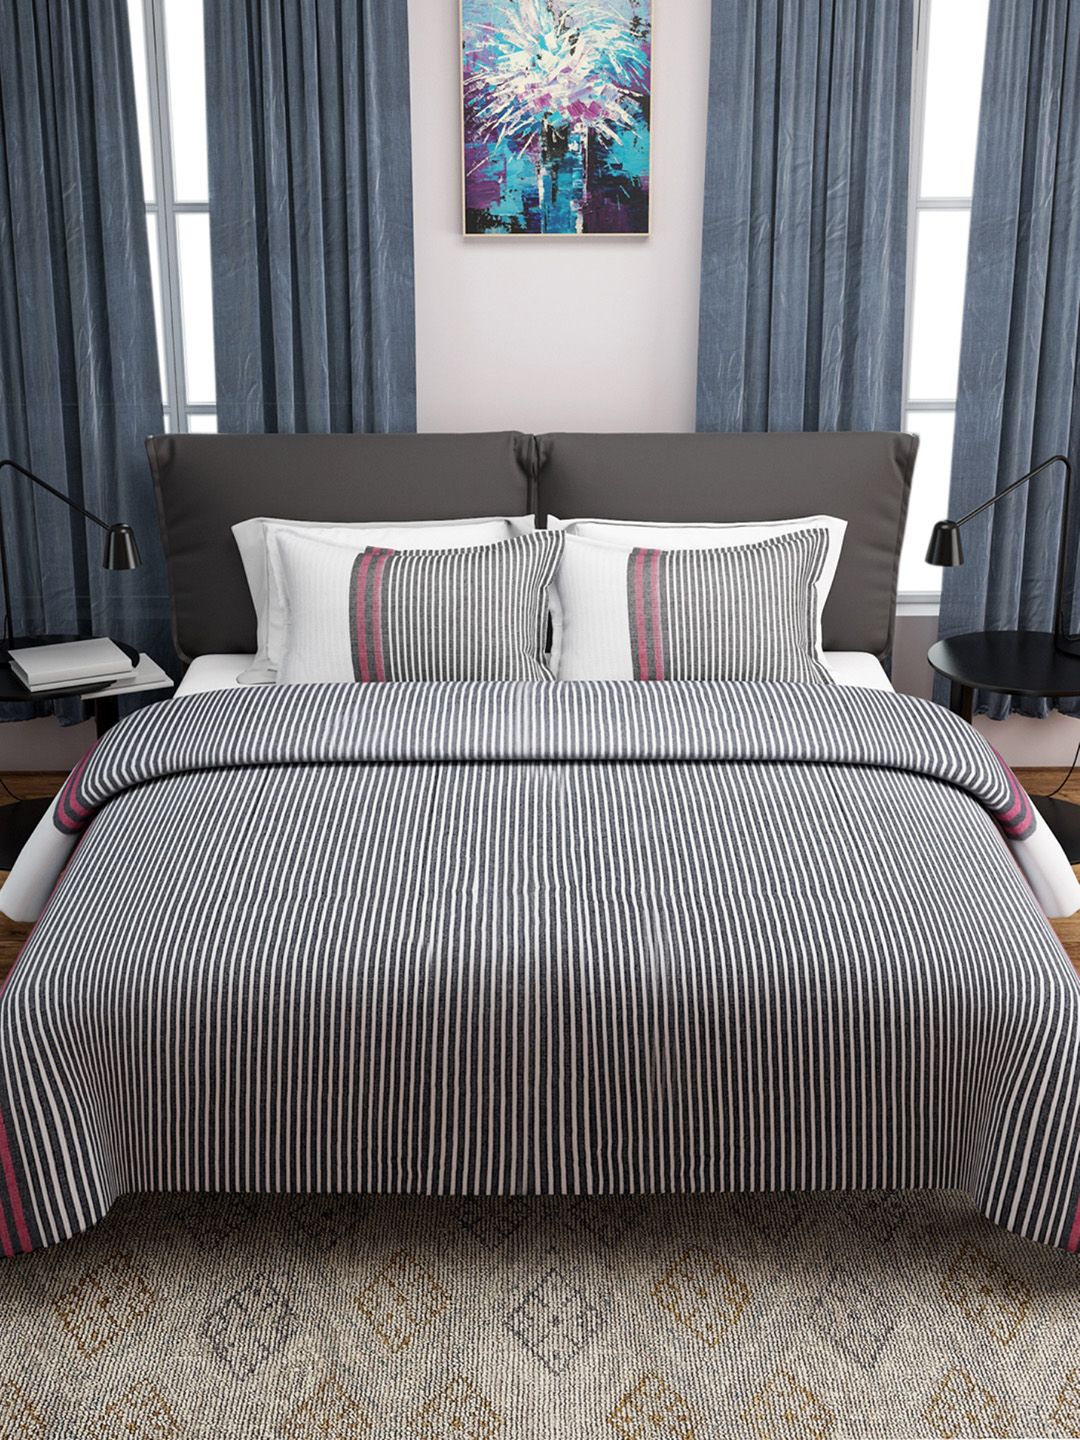 ROMEE Black & White Cotton Striped Double Bed Cover Price in India